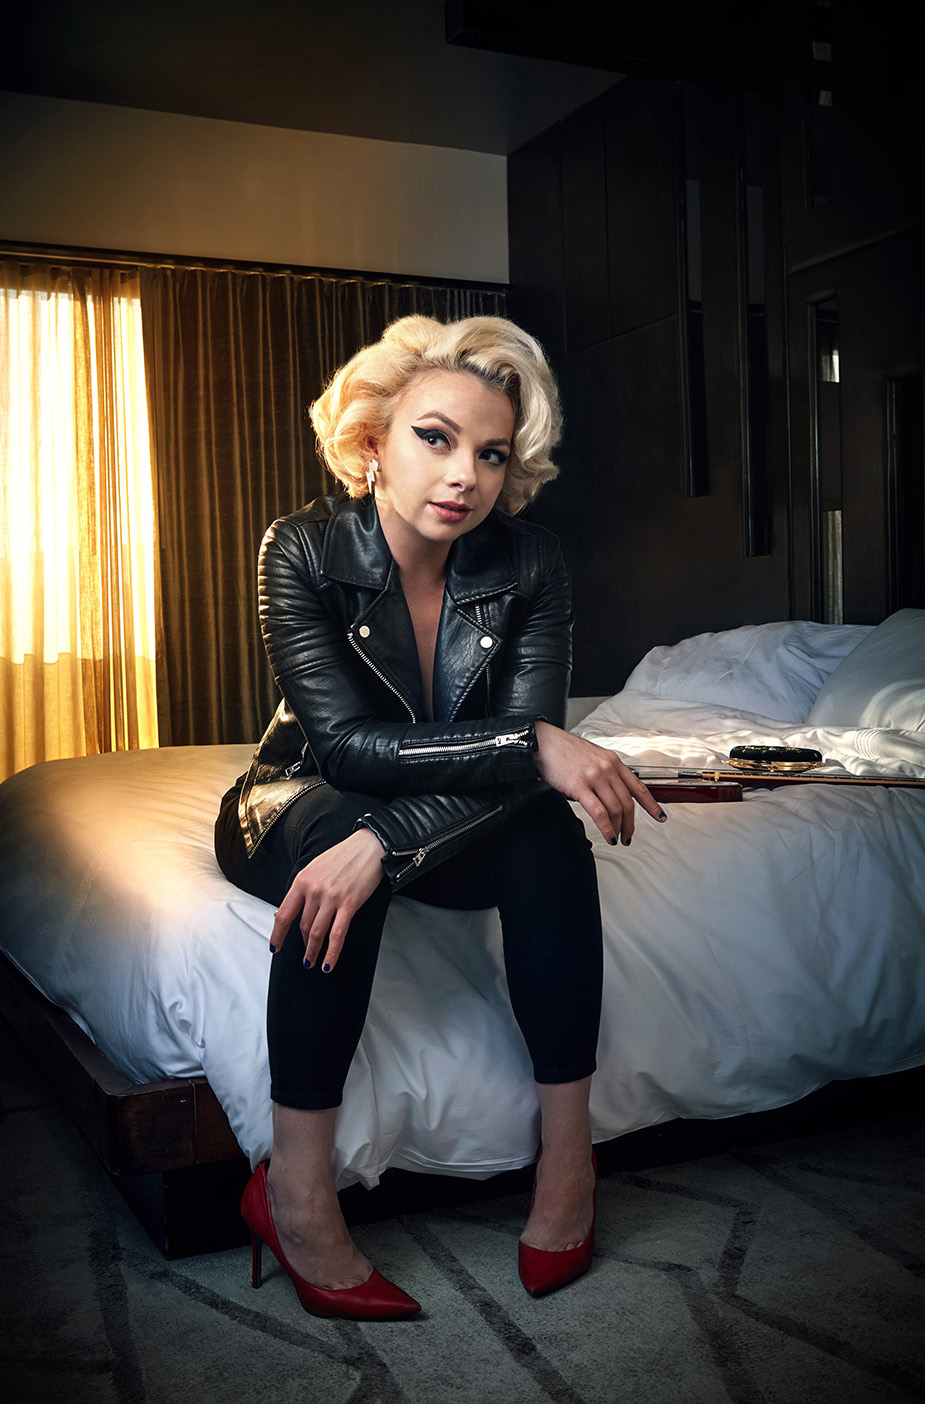 Samantha Fish  with her guitar sitting on a bed in a black outfit with red high heels